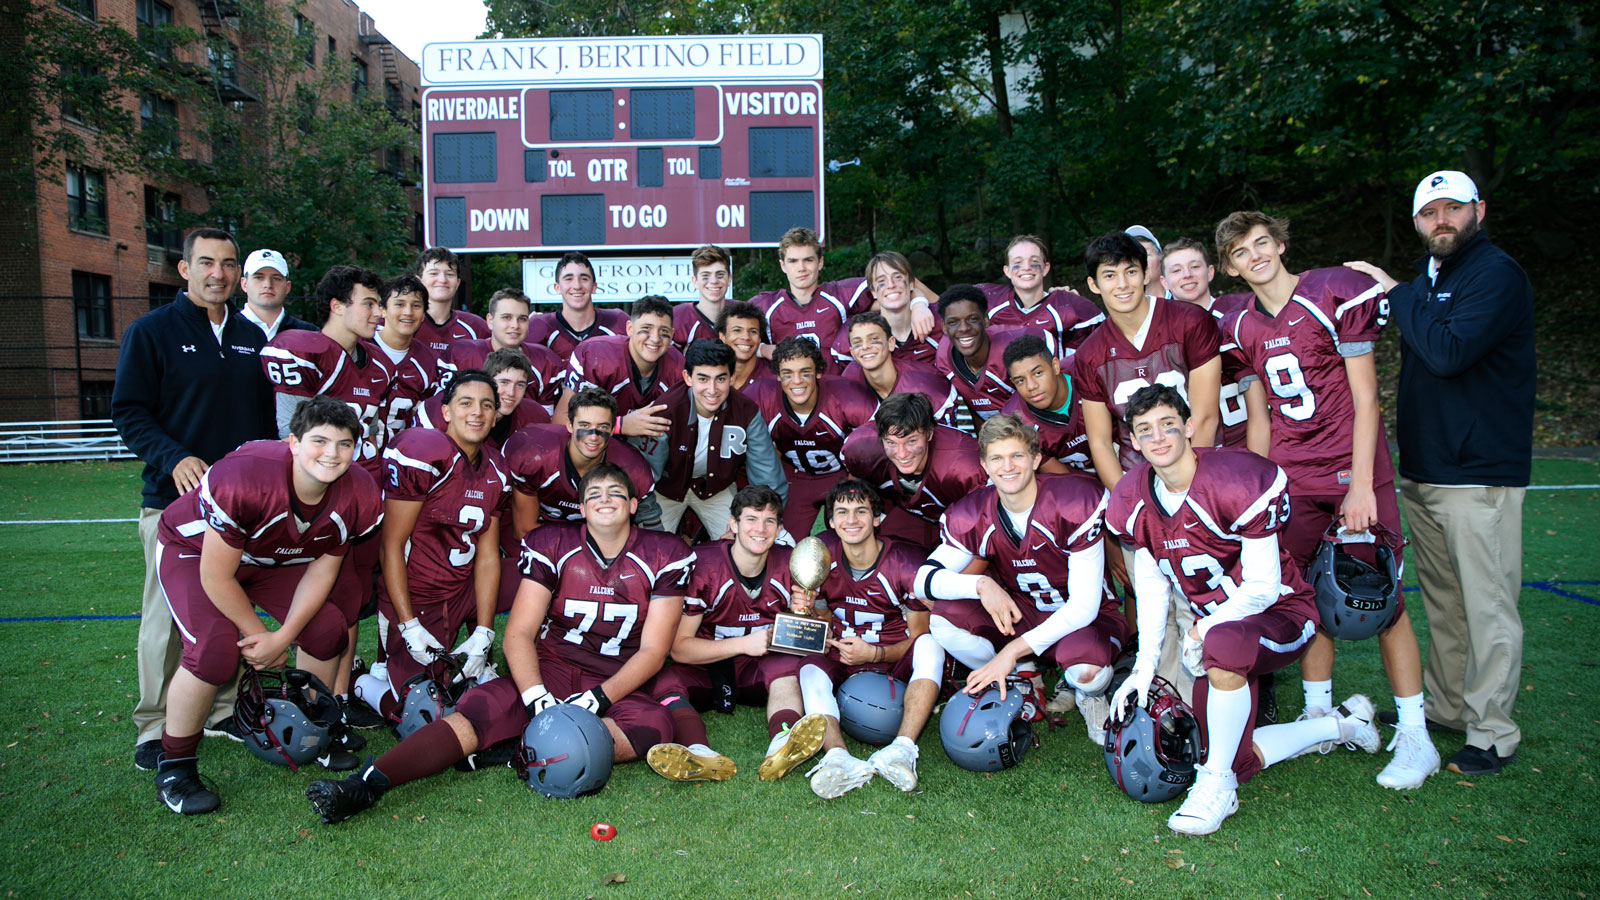 The Riverdale Falcons defeated the Fieldston Eagles in the 2019 Homecoming game and regained the "Birds of Prey" trophy for the first time since 2016.